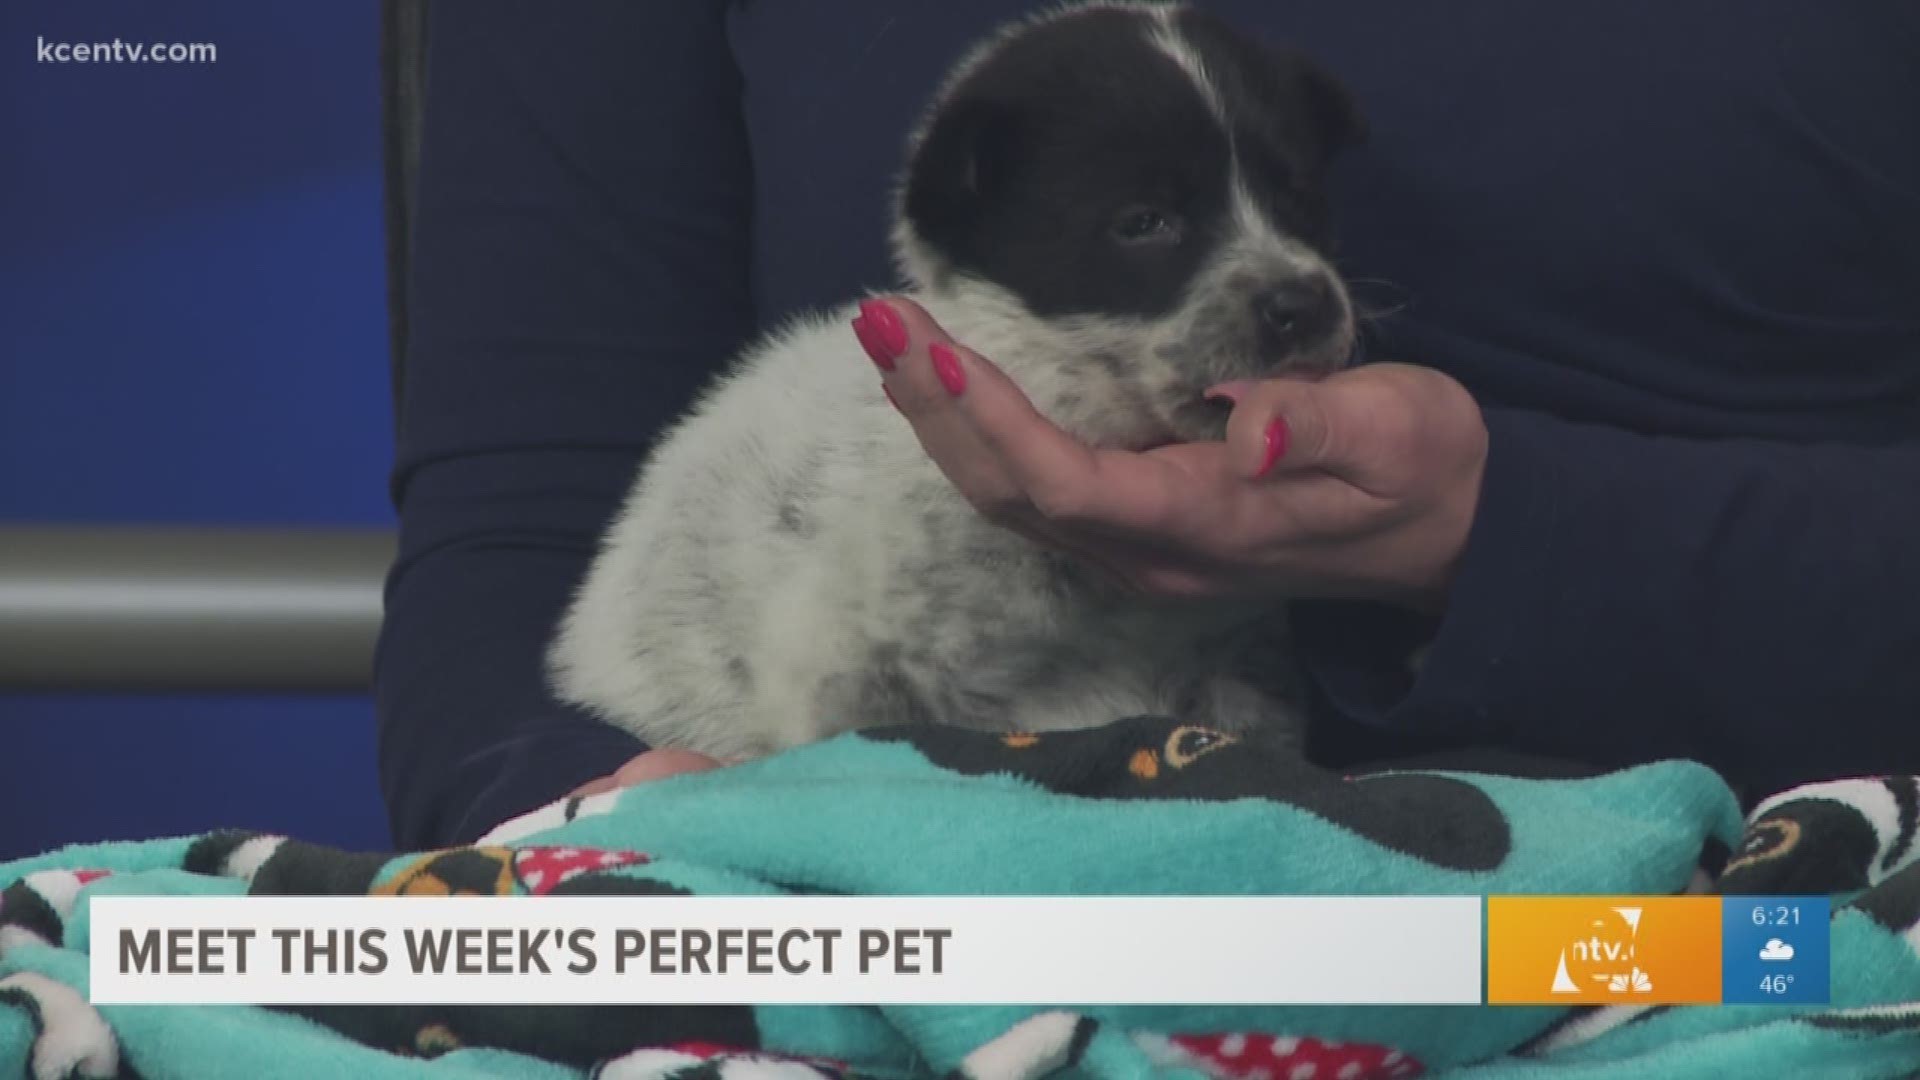 This 9-week-old Australian Cattle Dog is looking for a permanent home from the Humane Society of Central Texas.